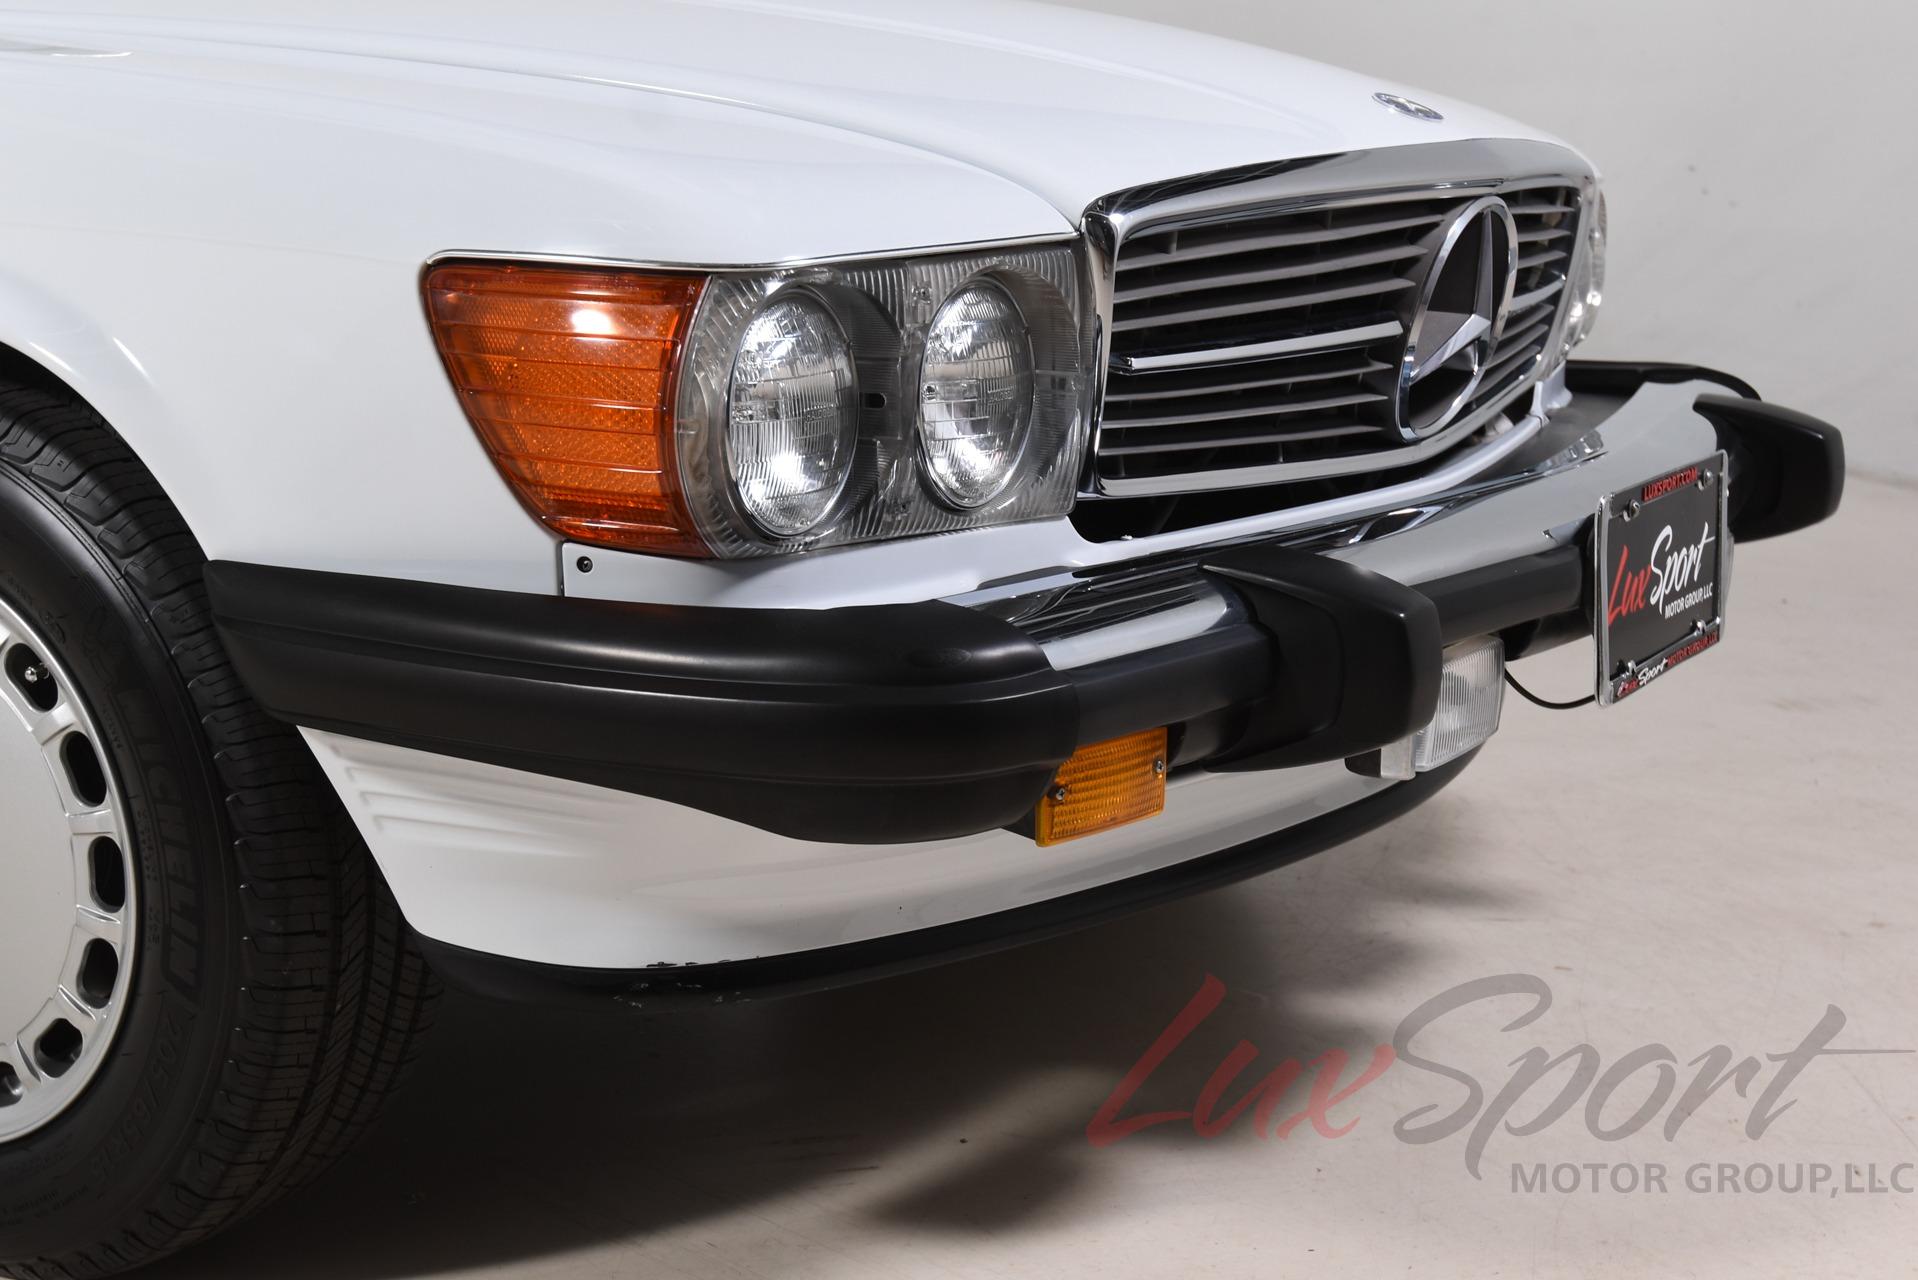 Used 1989 Mercedes-Benz 560-Class 560 SL | Syosset, NY